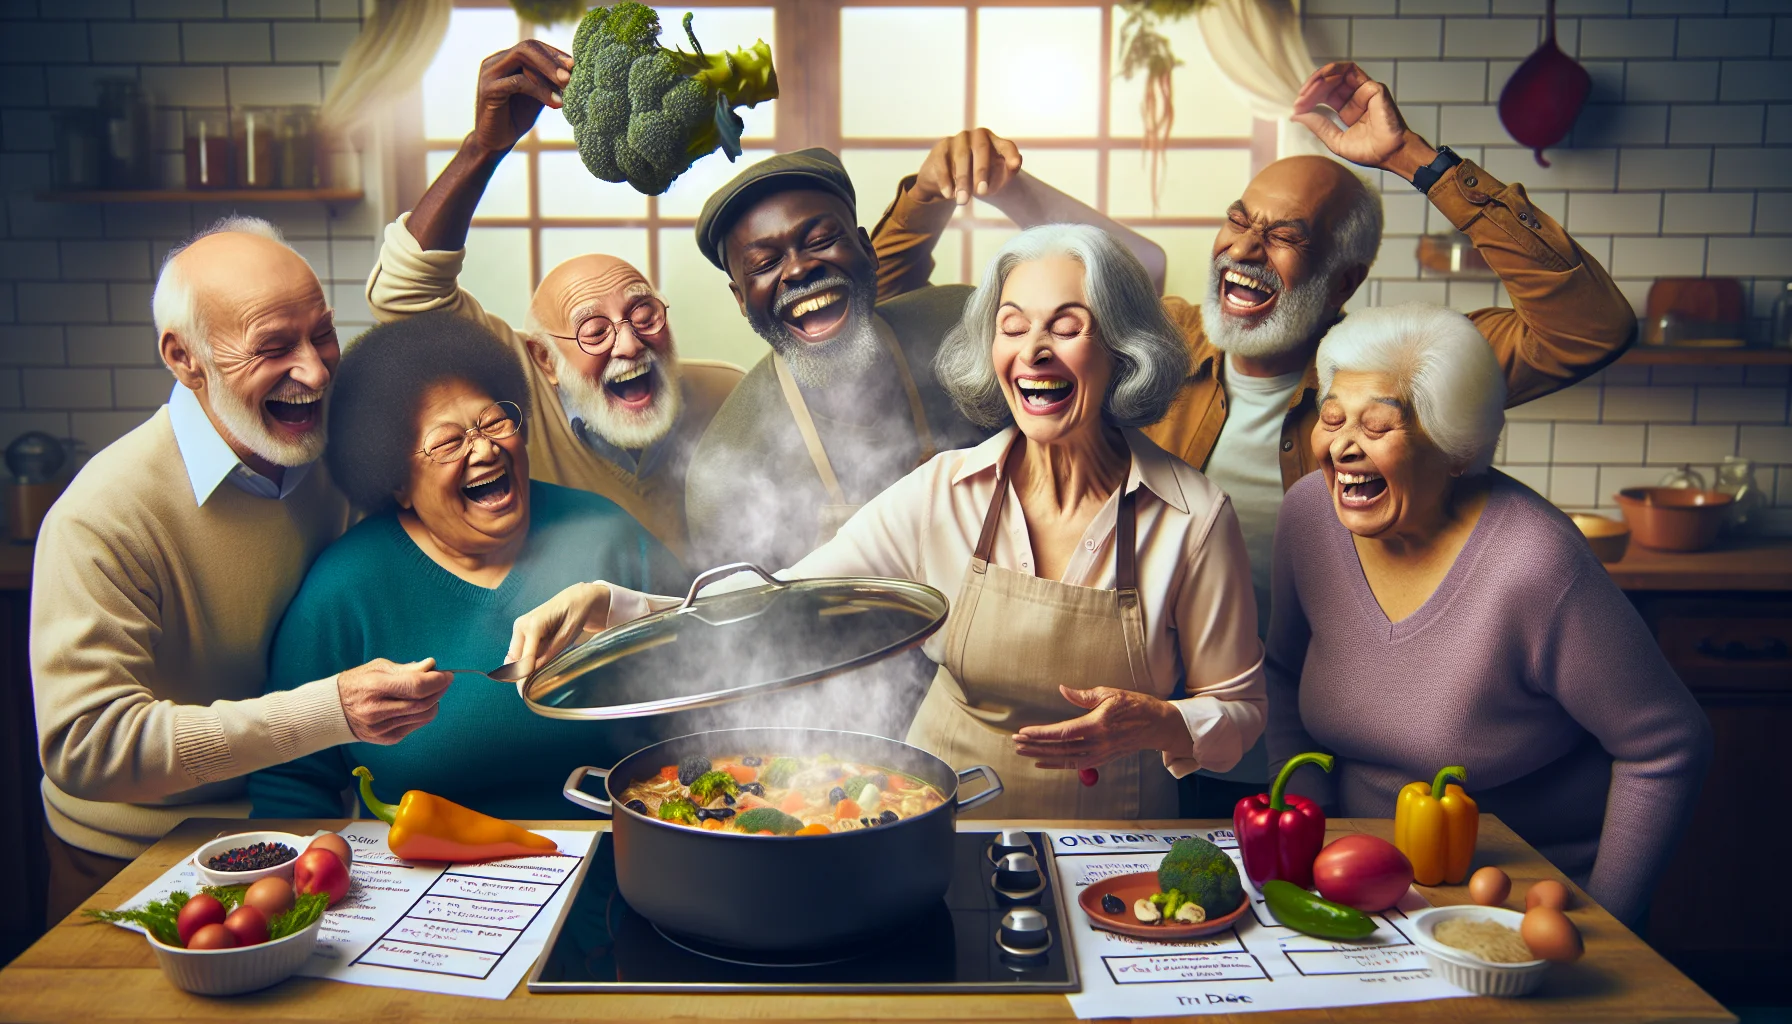 Conjure an amusing realistic scene highlighting one pot recipes. Picture this: A group of playful seniors from diverse descents like Black, Hispanic, and Middle-Eastern, are gathered in a brightly lit, warm kitchen. A Caucasian elderly woman, with a mischievous sparkle in her eyes, is lifting the lid of a big pot, revealing a colorful, healthful dish. Steam is swirling upward, causing an array of expressions from anticipation to restrained excitement on everyone's faces. They have meal plans and diet charts with humorous comments written on them. An elderly South Asian man is laughing heartily as he adds a broccoli to his plate.